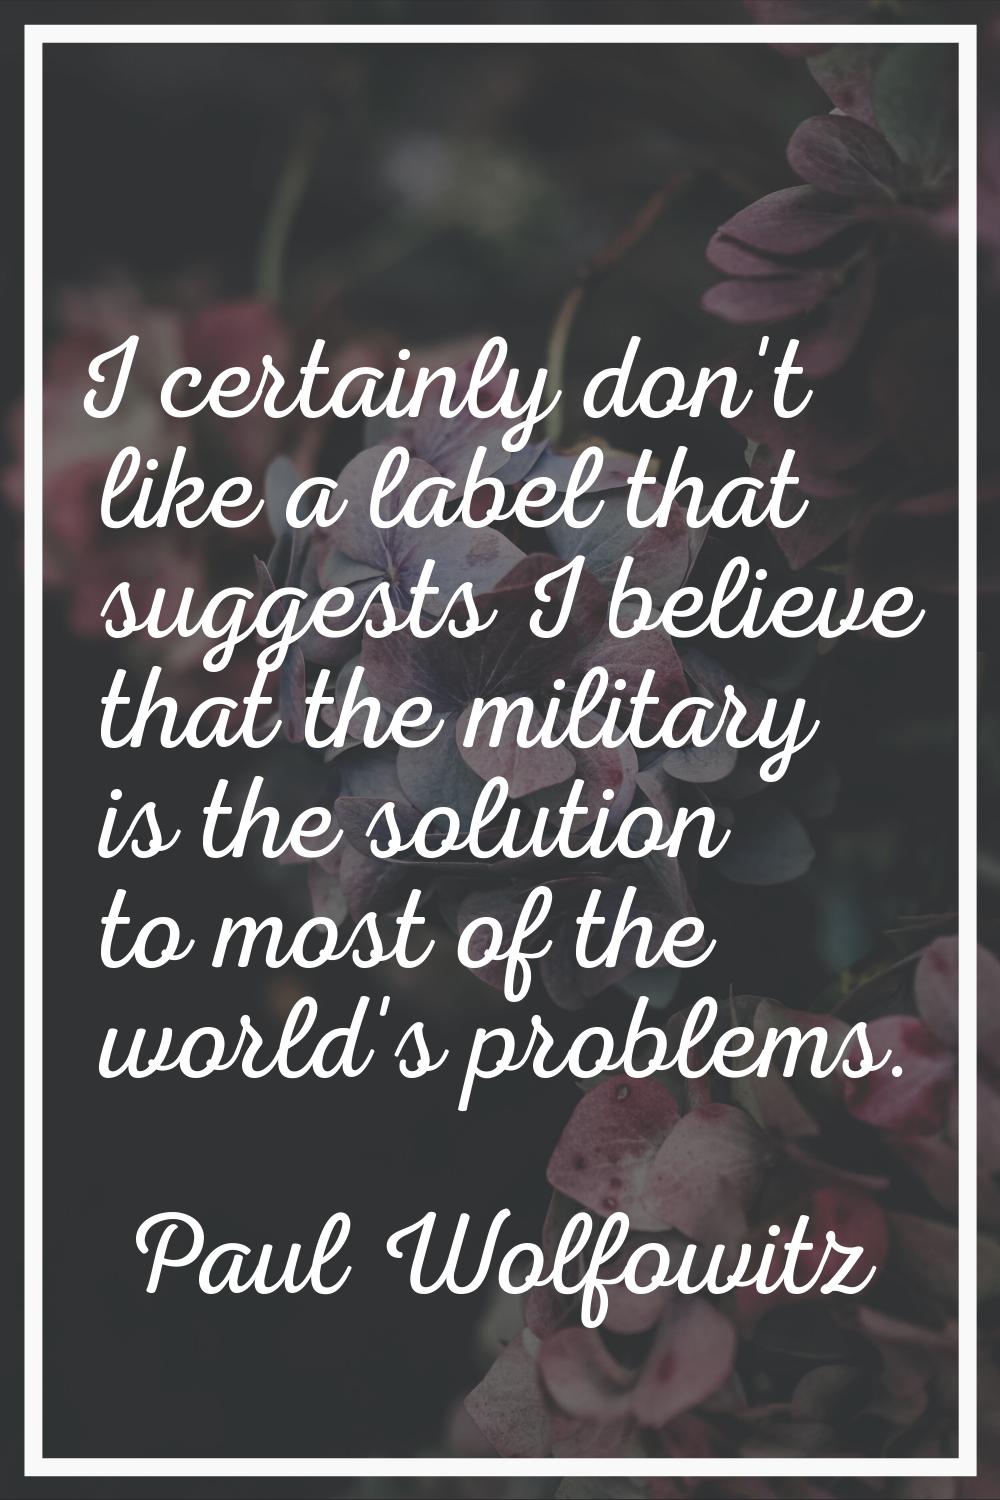 I certainly don't like a label that suggests I believe that the military is the solution to most of